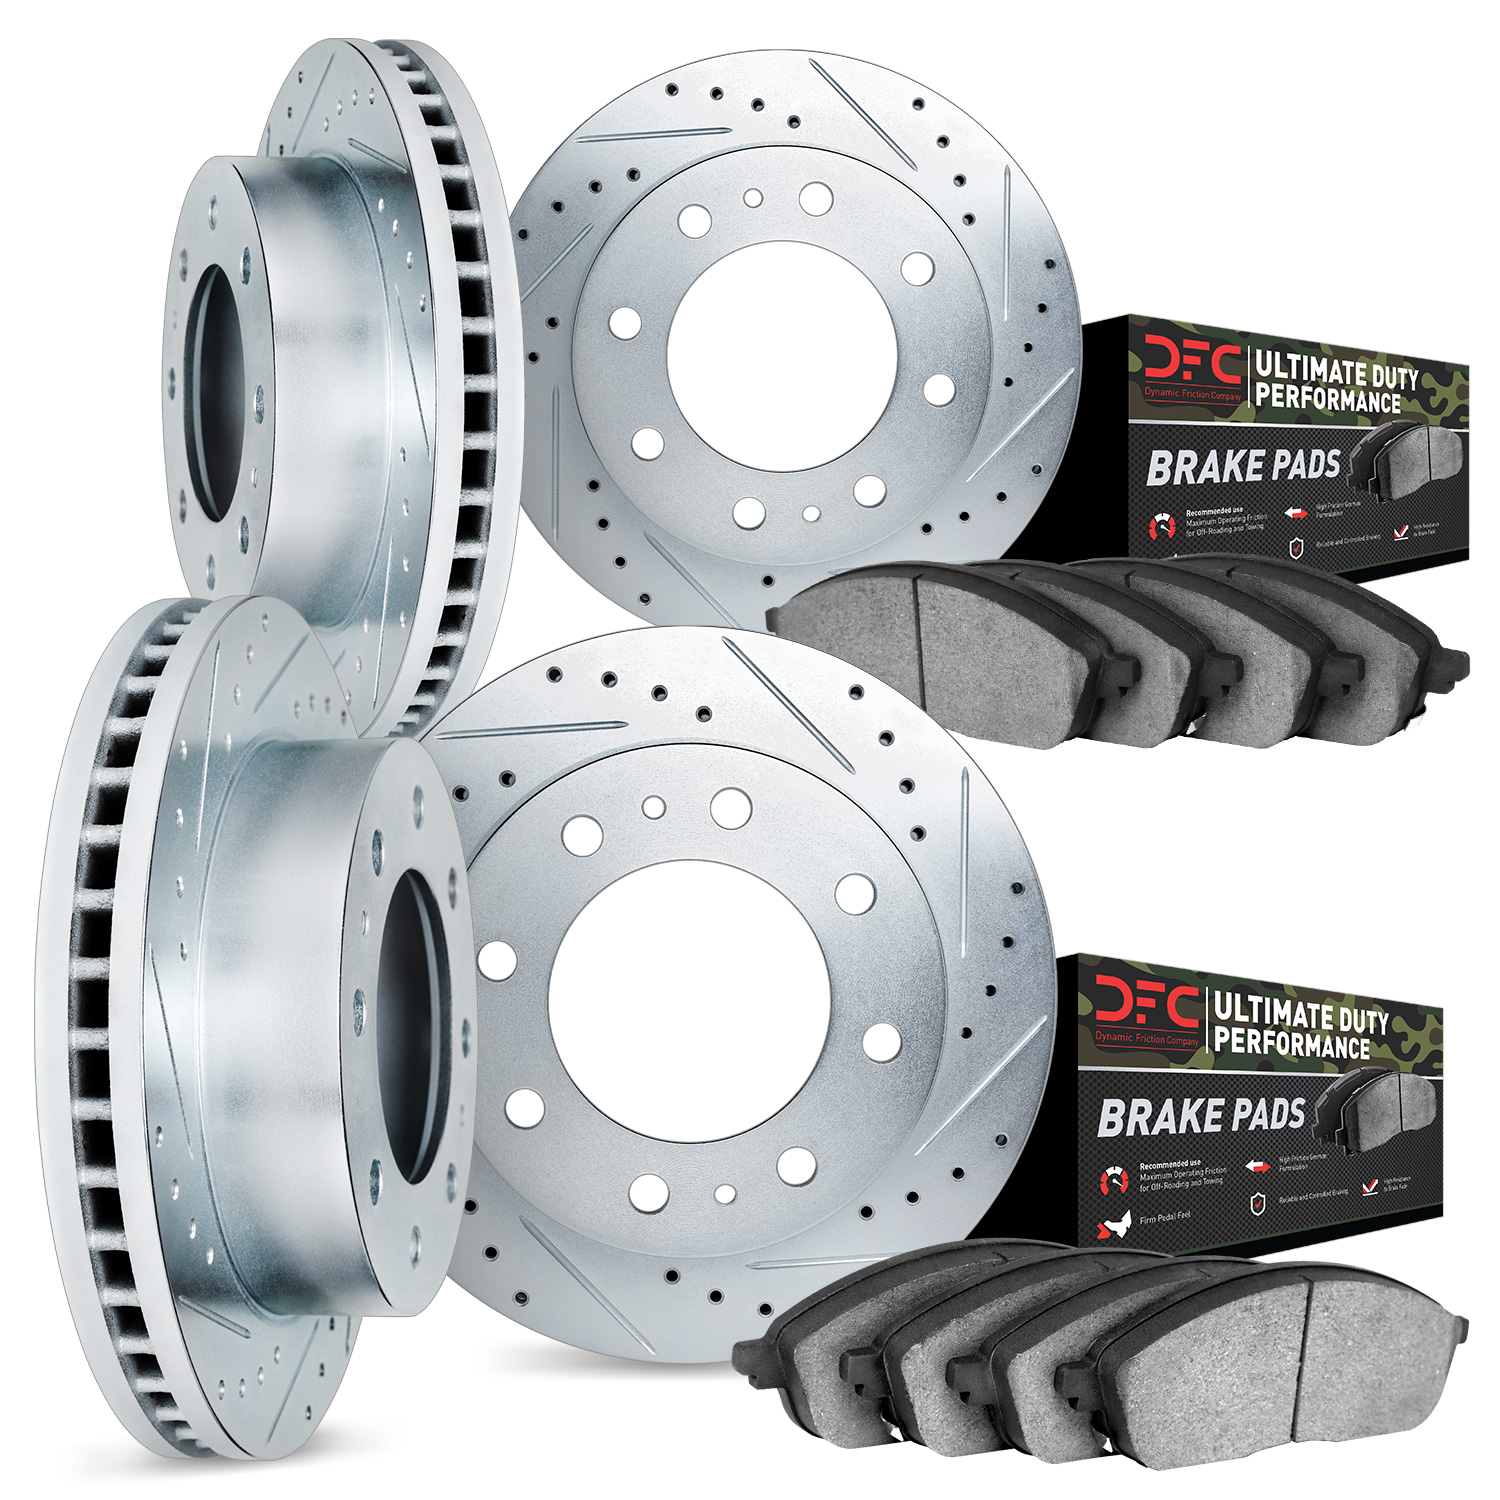 7404-54052 Drilled/Slotted Brake Rotors with Ultimate-Duty Brake Pads Kit [Silver], Fits Select Ford/Lincoln/Mercury/Mazda, Posi